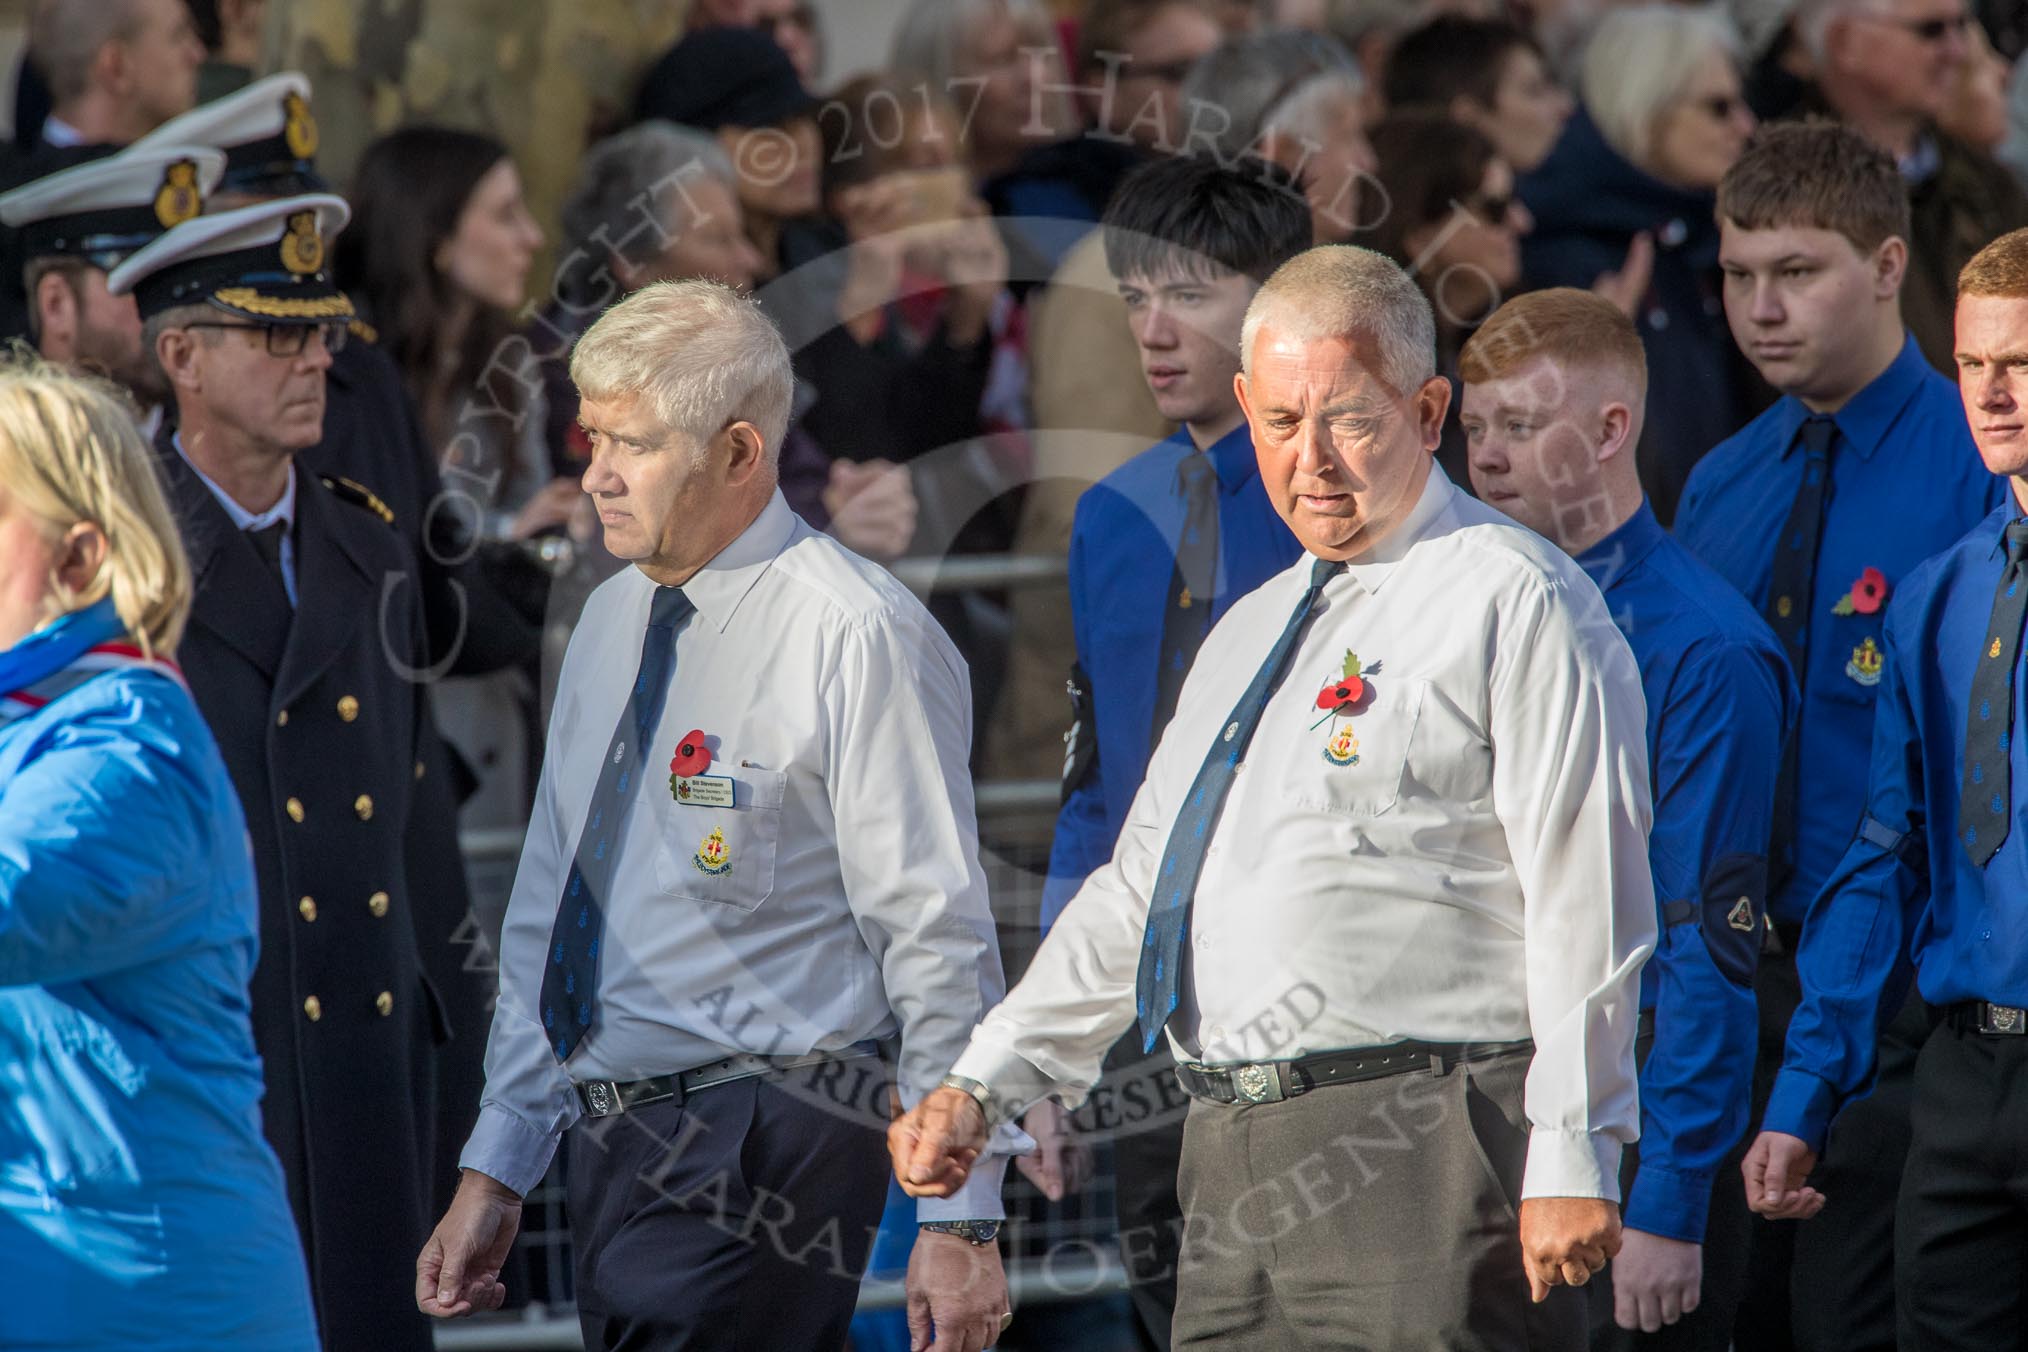 The Boys' Brigade (Group M39, 79 members) during the Royal British Legion March Past on Remembrance Sunday at the Cenotaph, Whitehall, Westminster, London, 11 November 2018, 12:30.